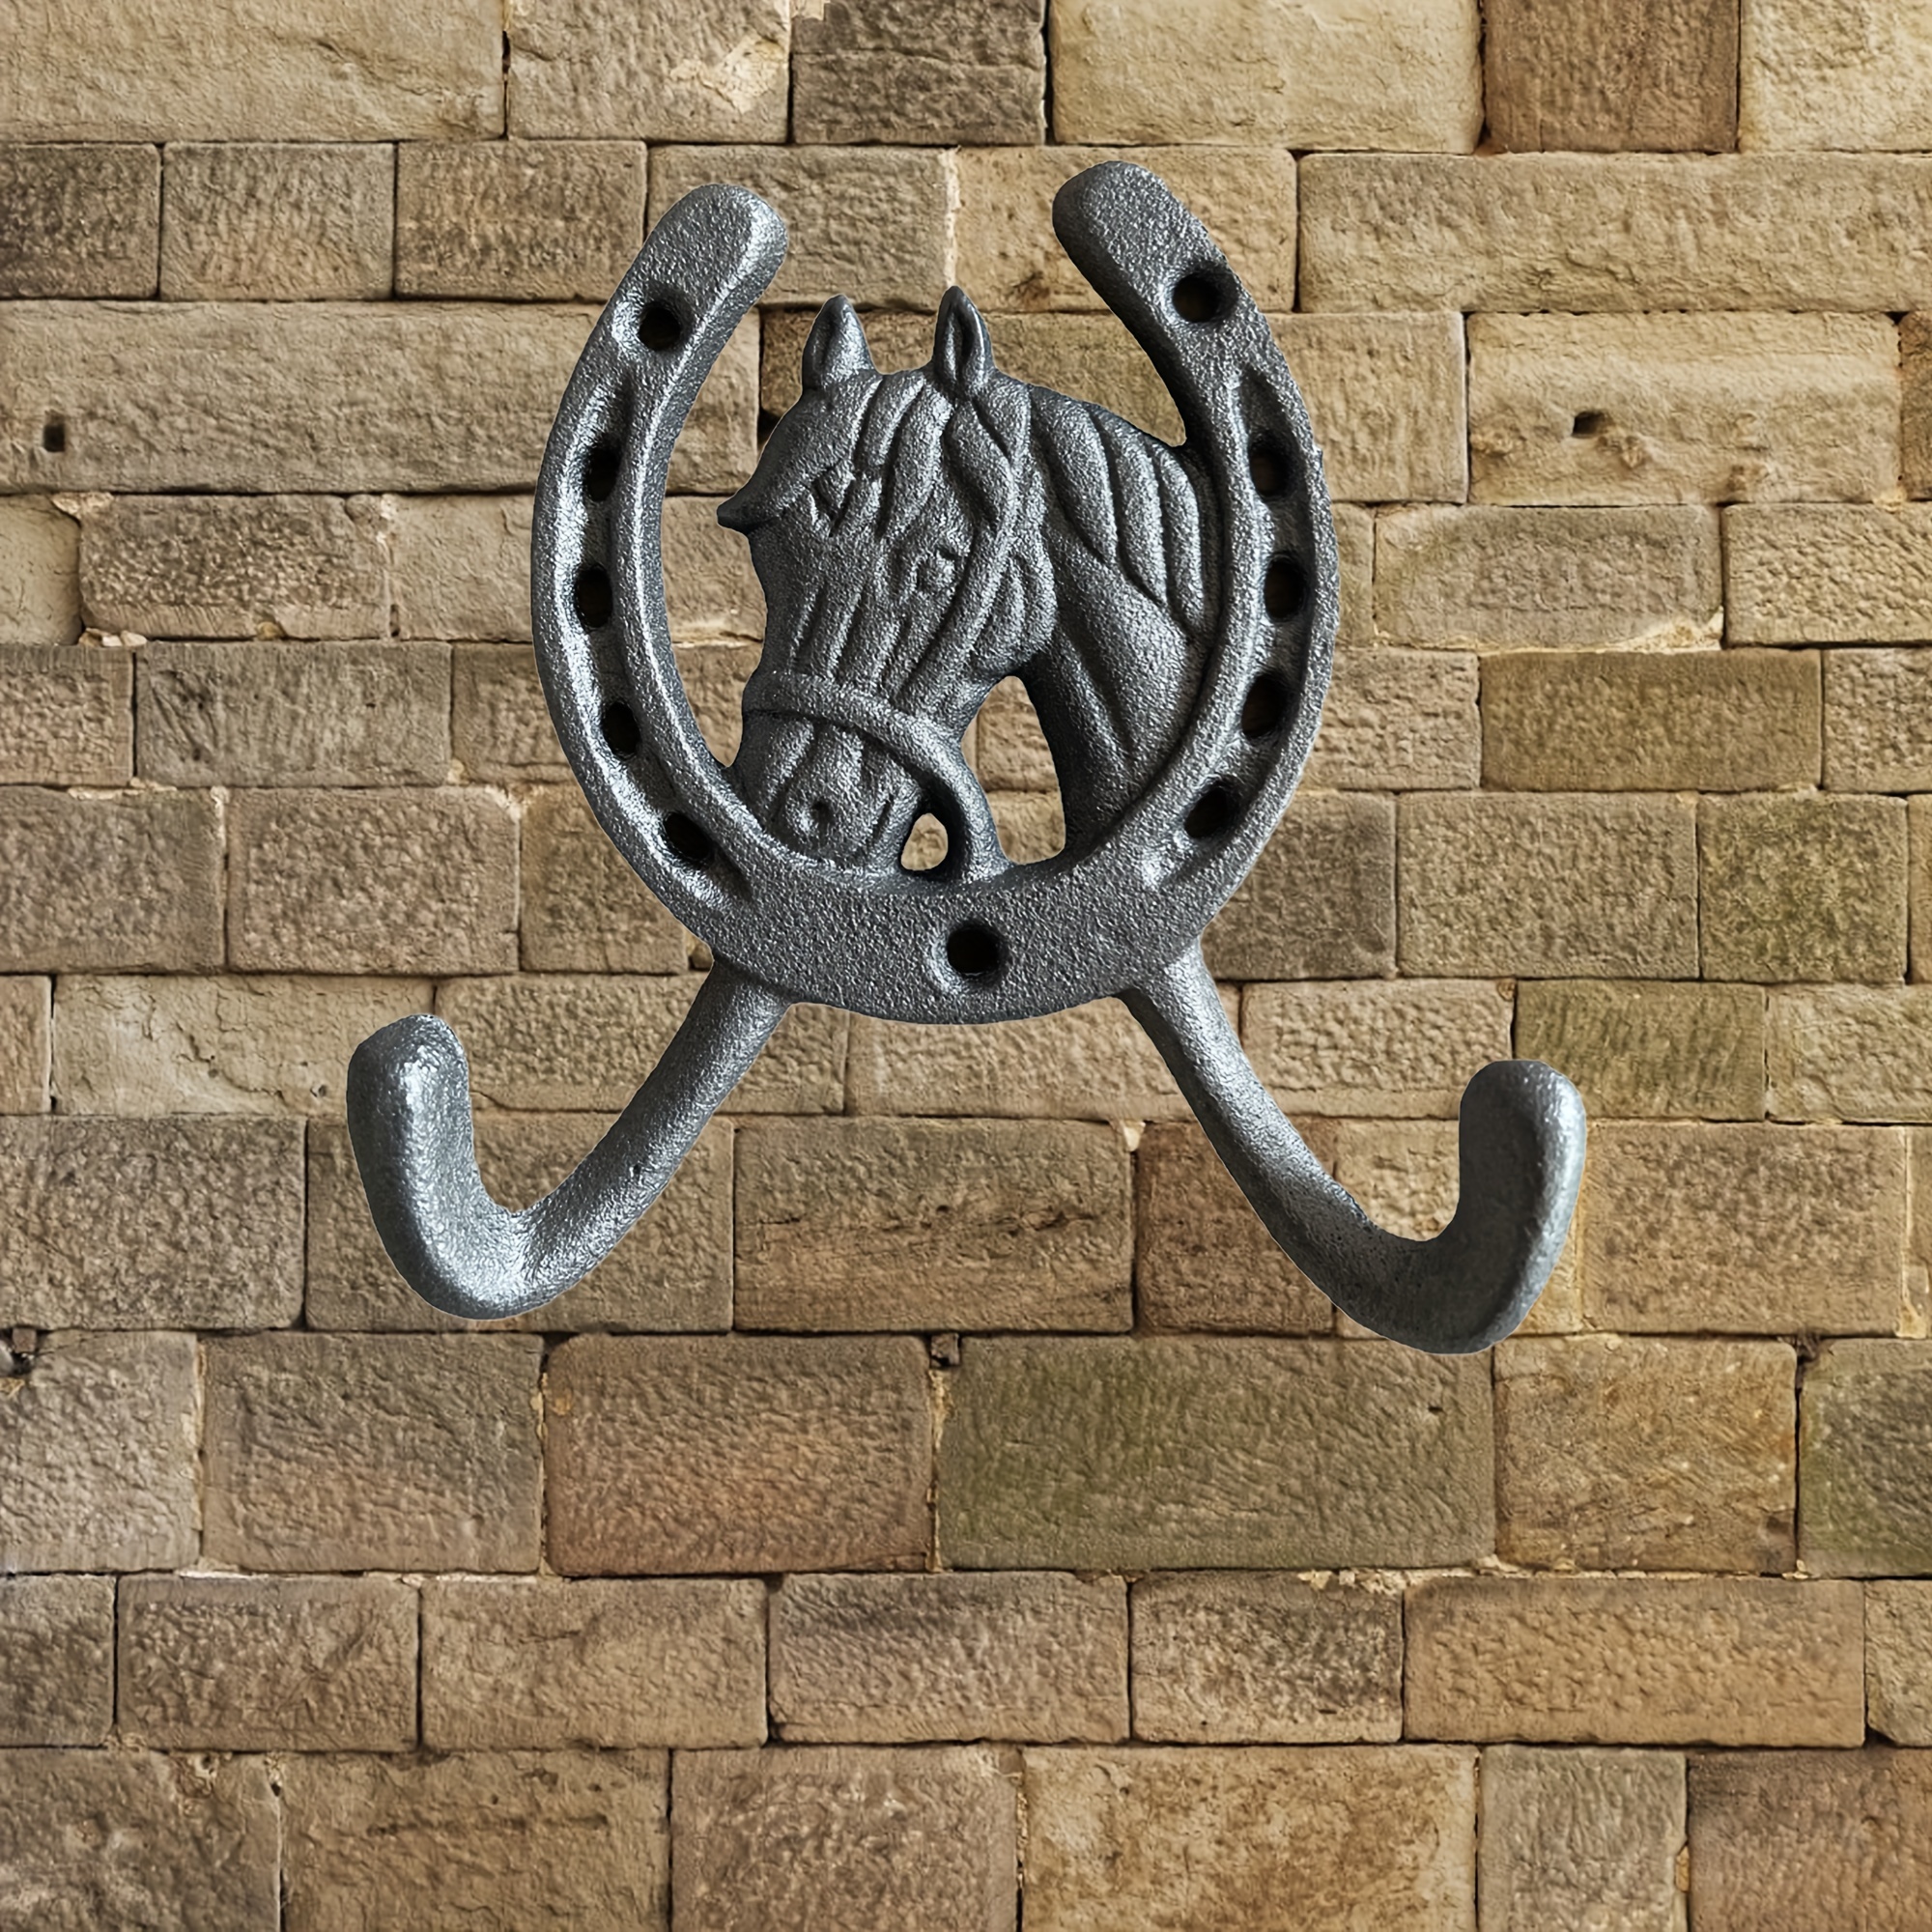 

artisan Crafted" Rustic Horse Head Wall Hook - Cast Iron, Easy Install For Home & Garden Decor